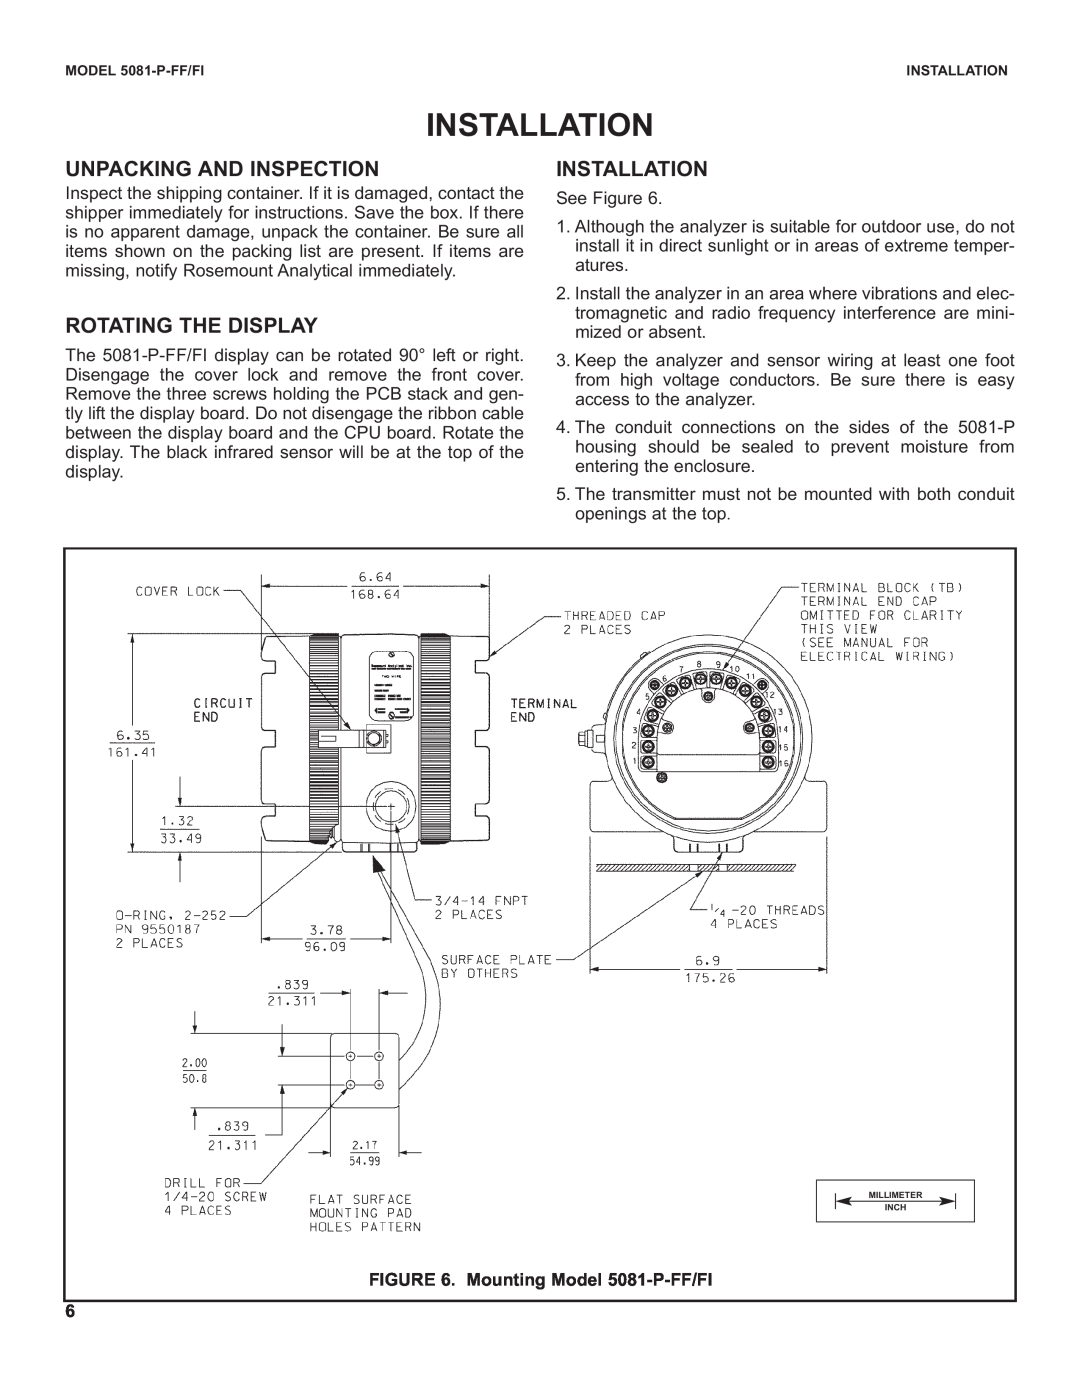 Emerson instruction sheet Installation, Unpacking And Inspection, Rotating The Display, Mounting Model 5081-P-FF/FI 